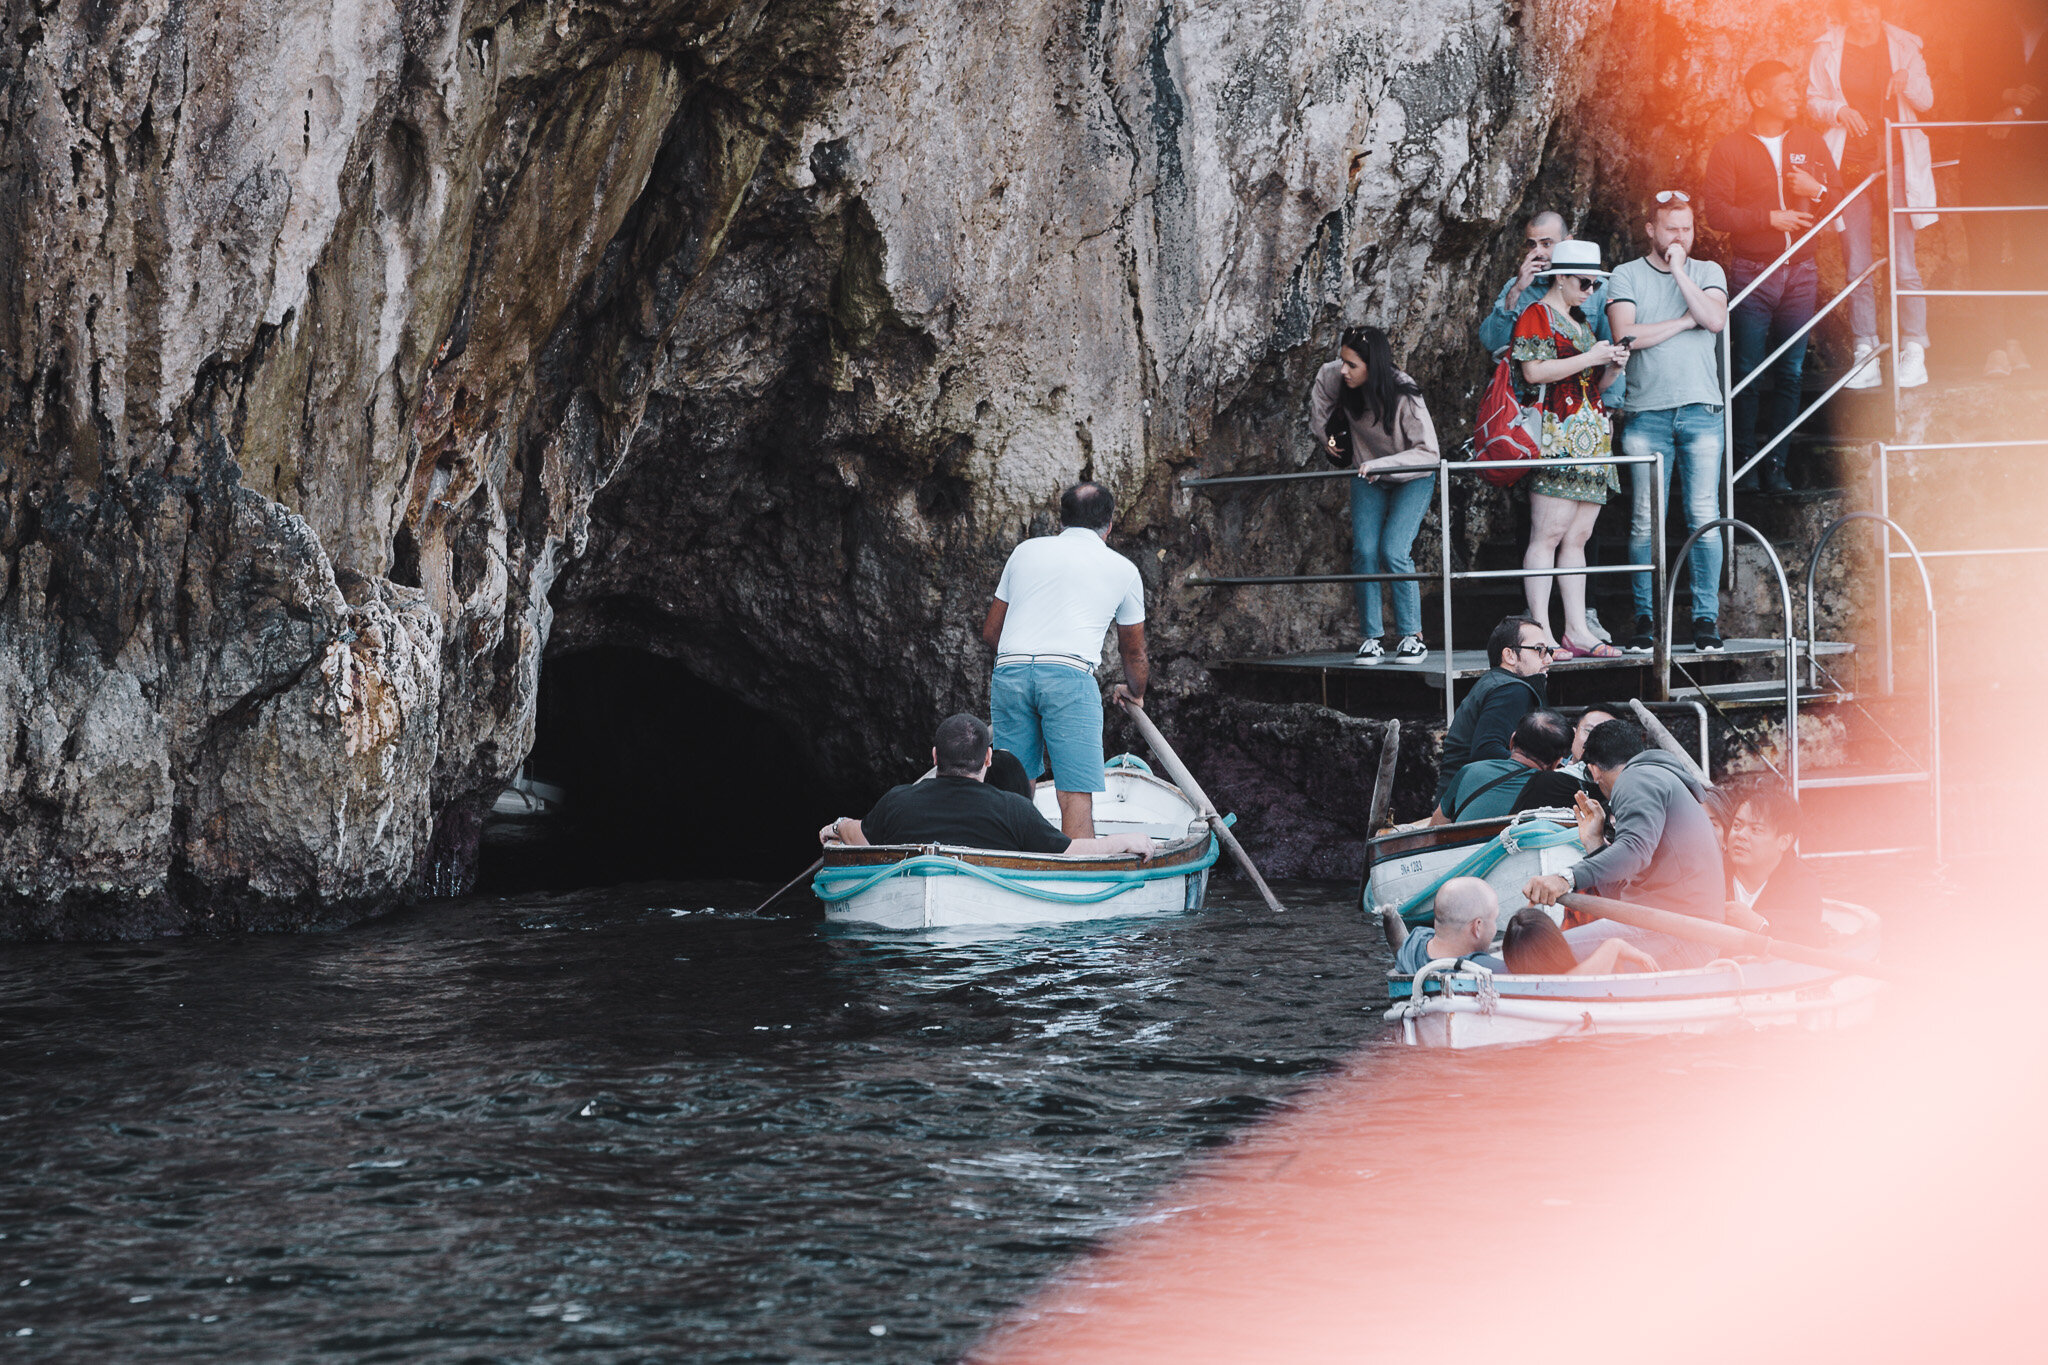 Alex-MJ-On-the-GO-4 semaines-italie-Blue-Grotto-Barque-entree-grotte.jpg